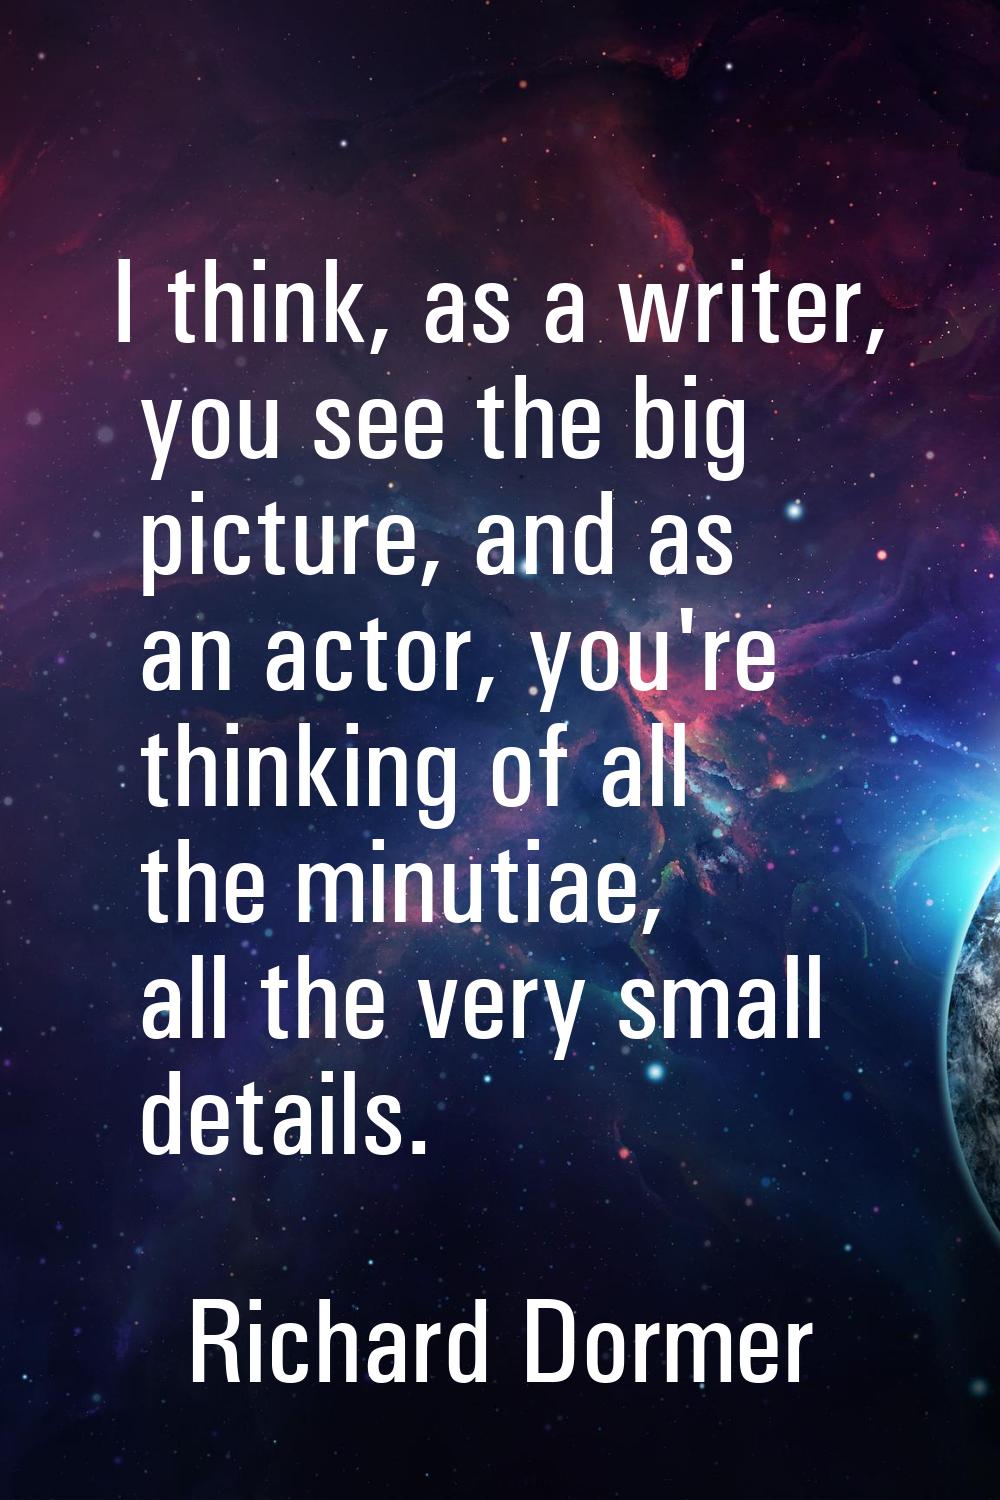 I think, as a writer, you see the big picture, and as an actor, you're thinking of all the minutiae